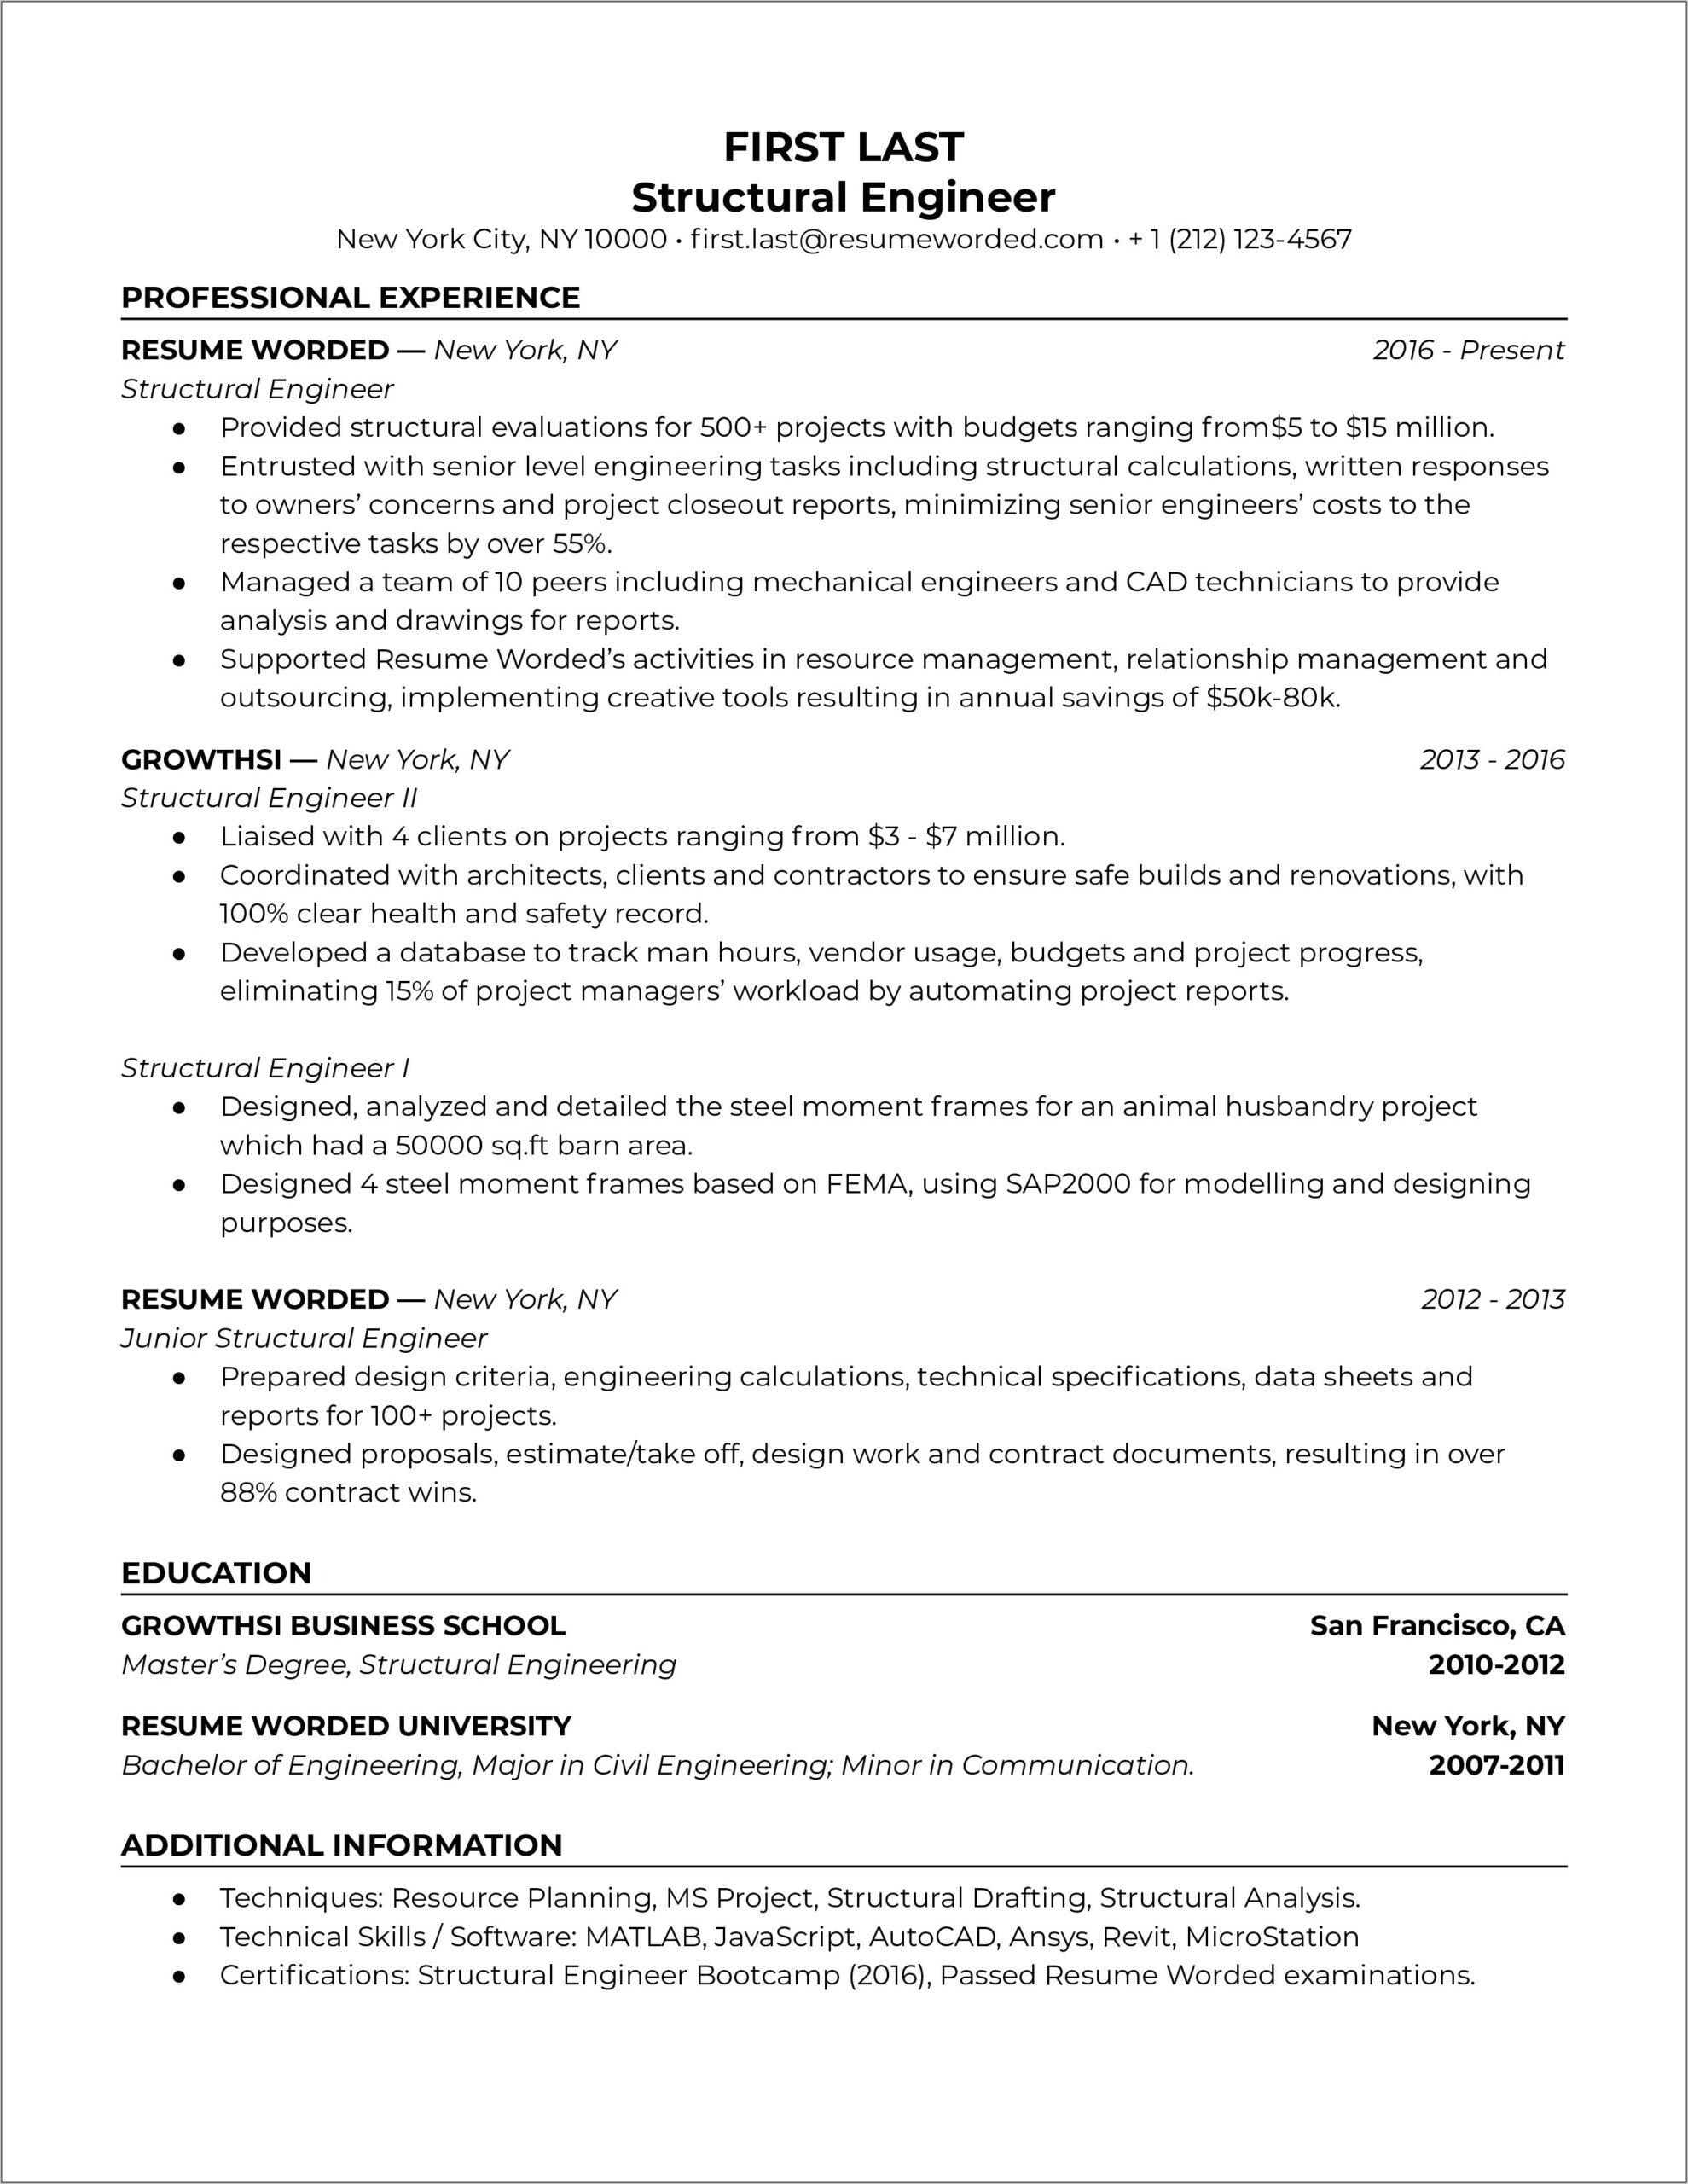 Structural Engineer Resume Sample Canada